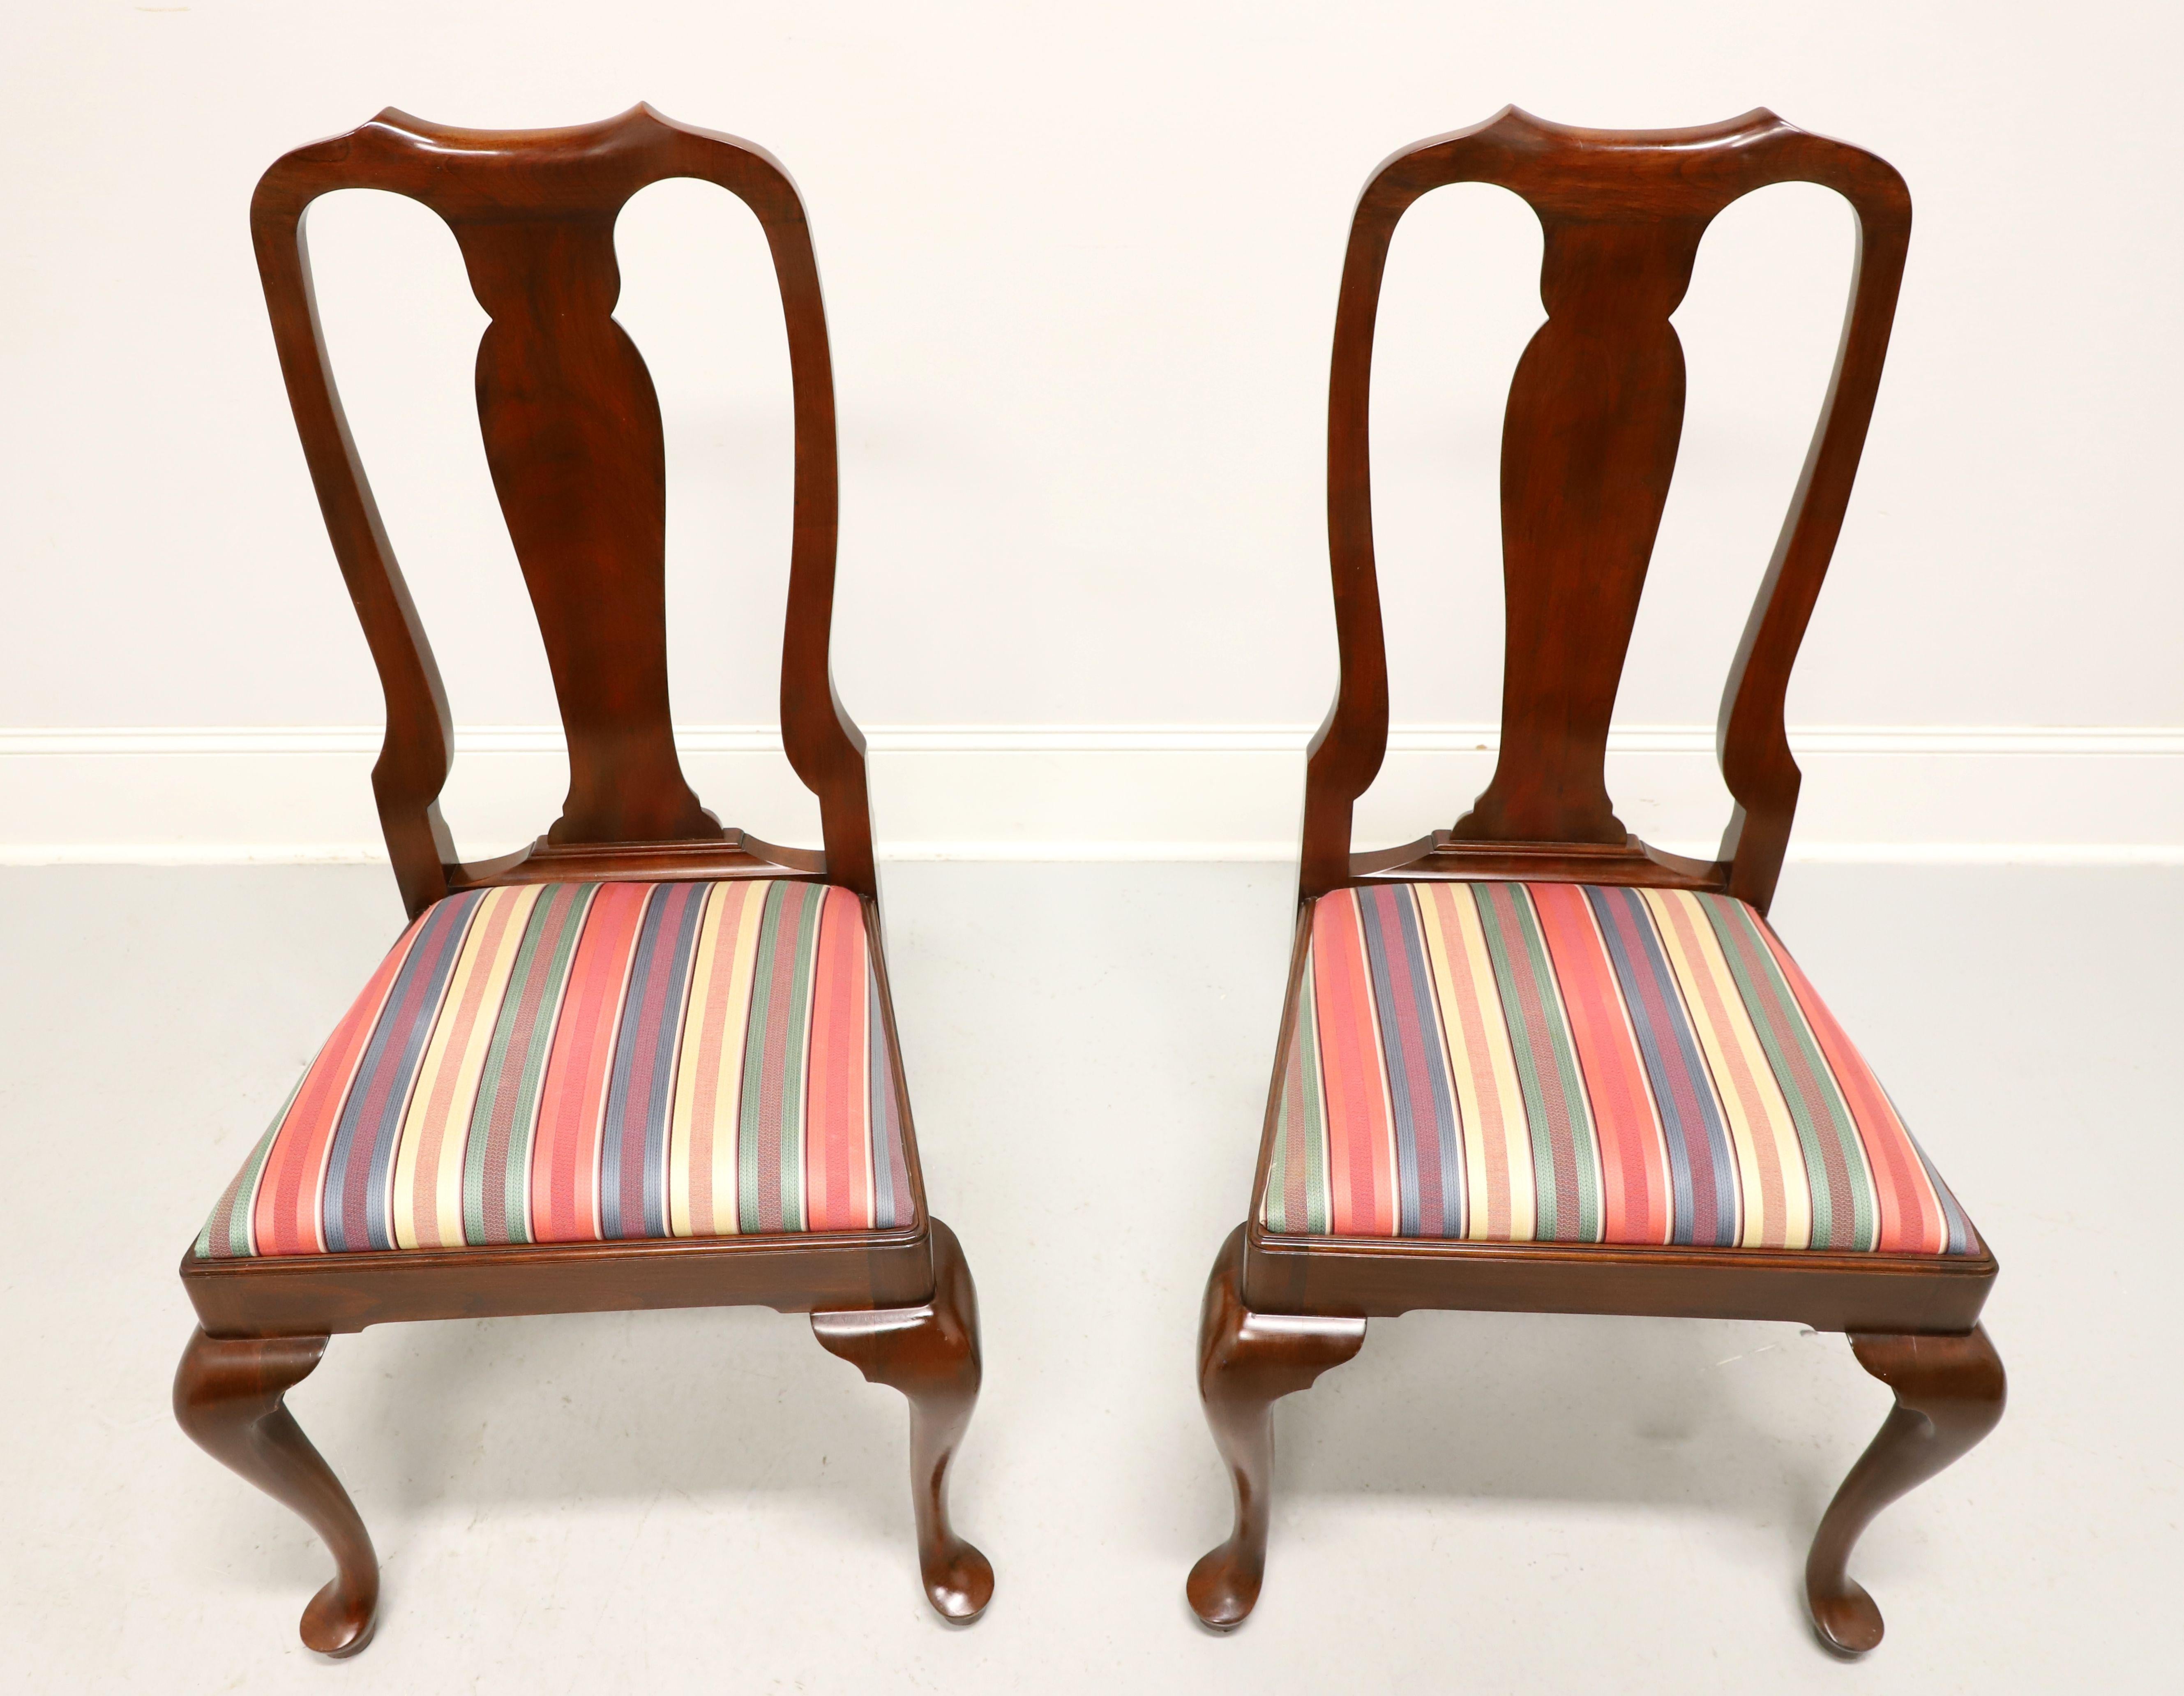 A pair of Queen Anne style dining side chairs by Henkel Harris, of Winchester, Virginia, USA. Solid wild black cherry wood, carved center backrest, upholstered seat in a multi-color stripe patterned fabric, solid apron, cabriole legs and pad feet.